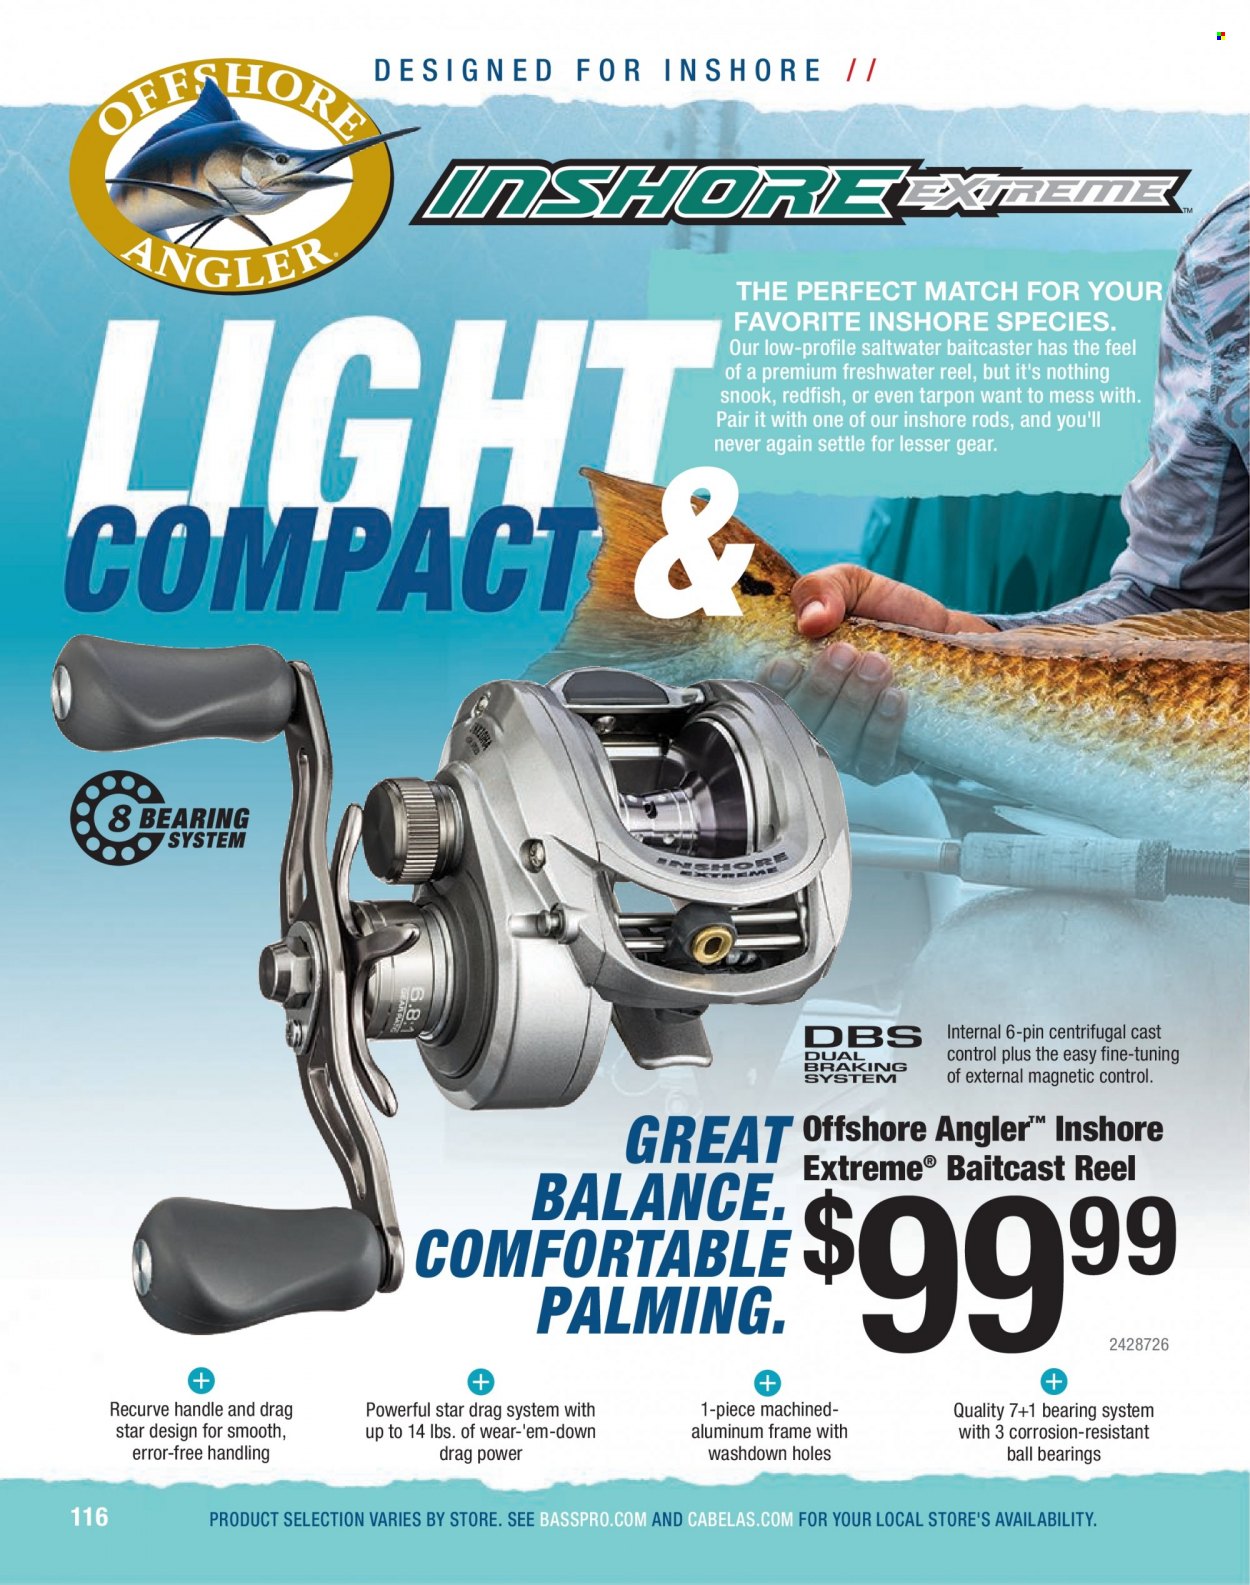 Bass Pro Shops Flyer - Sales products - baitcast reel, reel. Page 116.